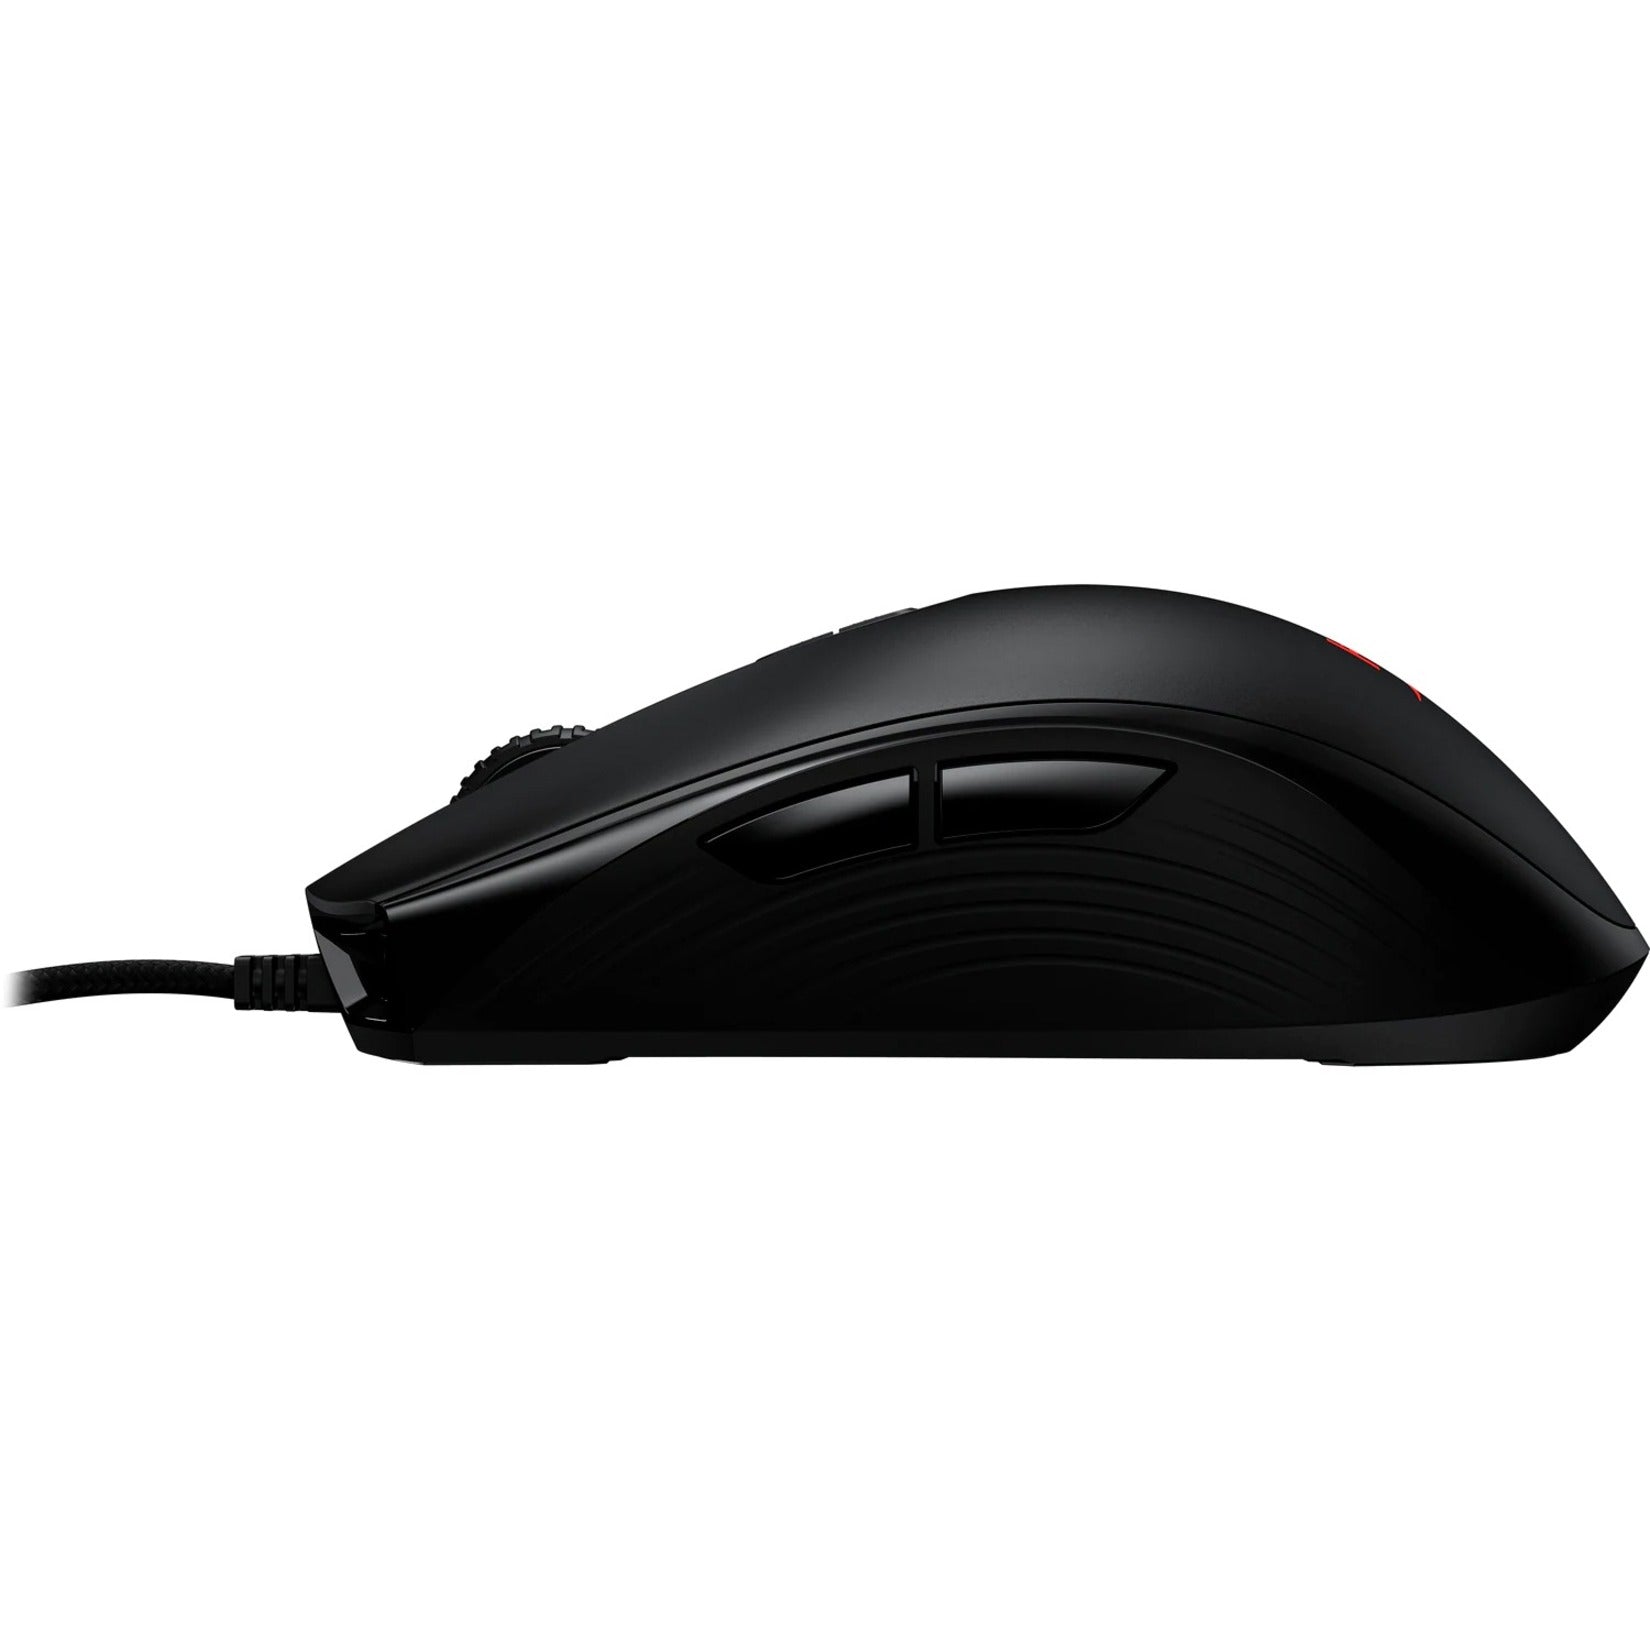 HyperX 4P4F8AA Pulsefire Core Gaming Mouse (Black), 7 Programmable Buttons, 6200 DPI